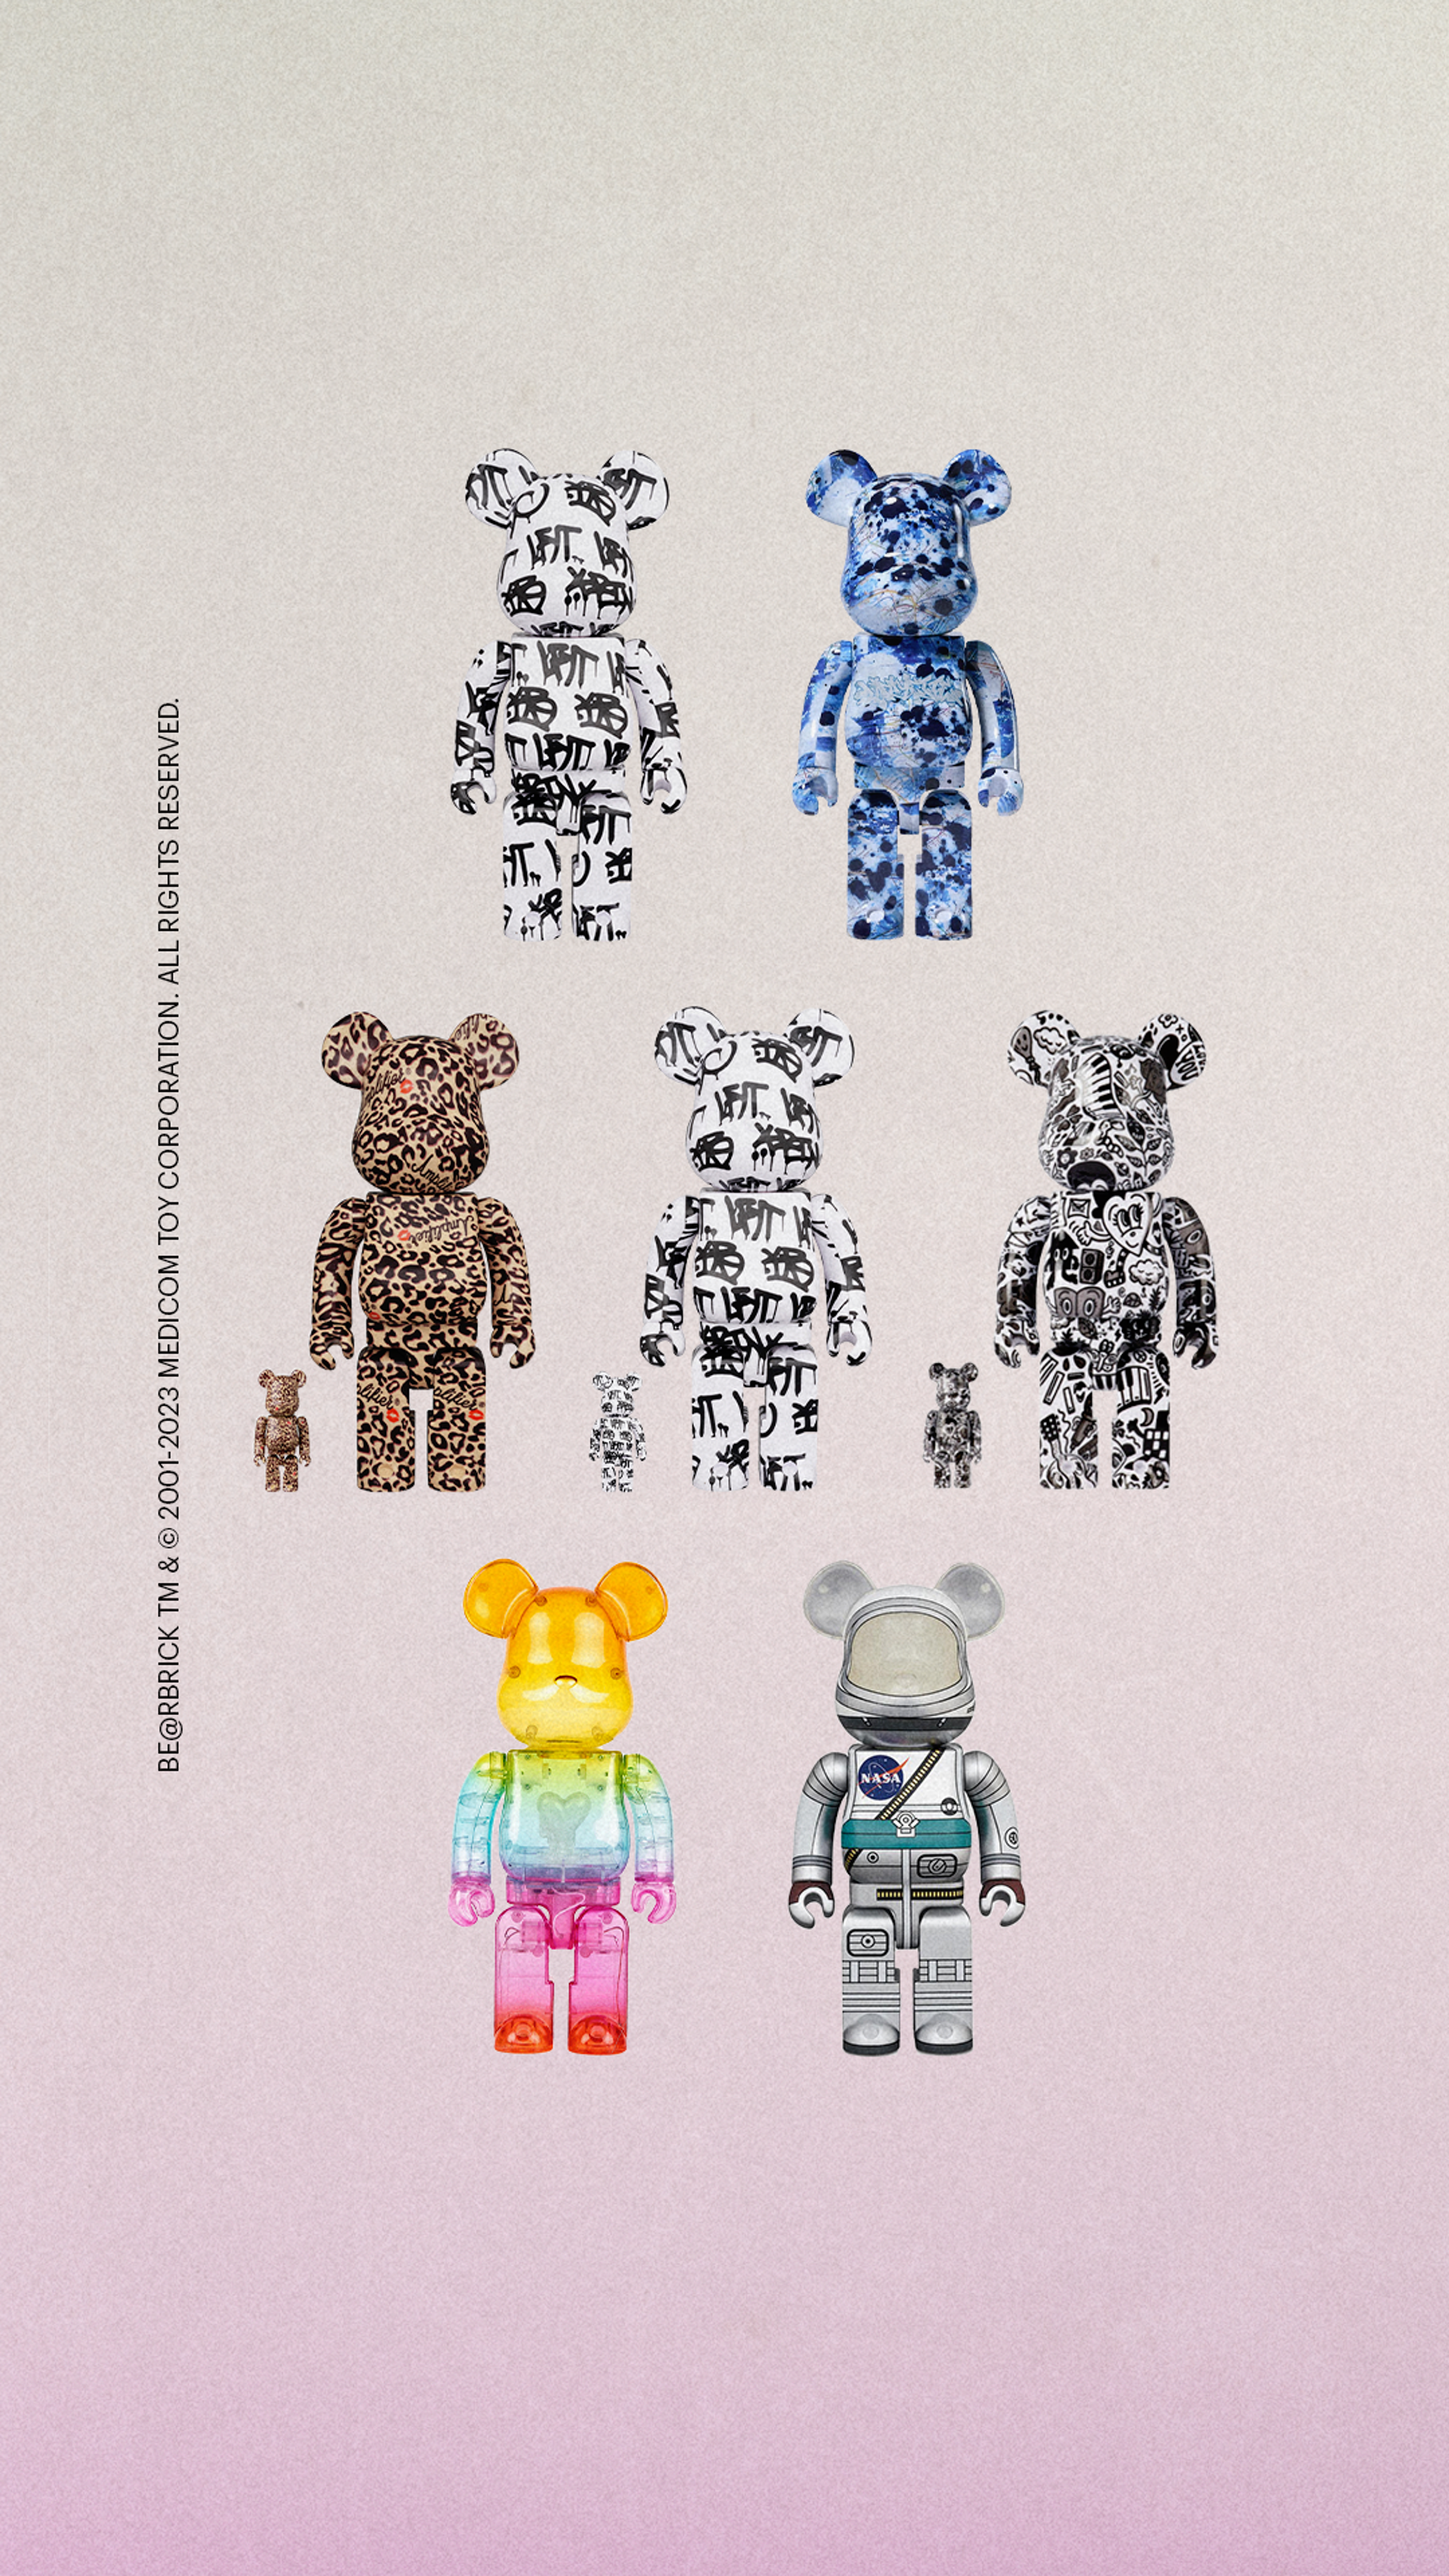 Preview image for the show titled "BE@RBRICK" at Today @ 11:20 AM